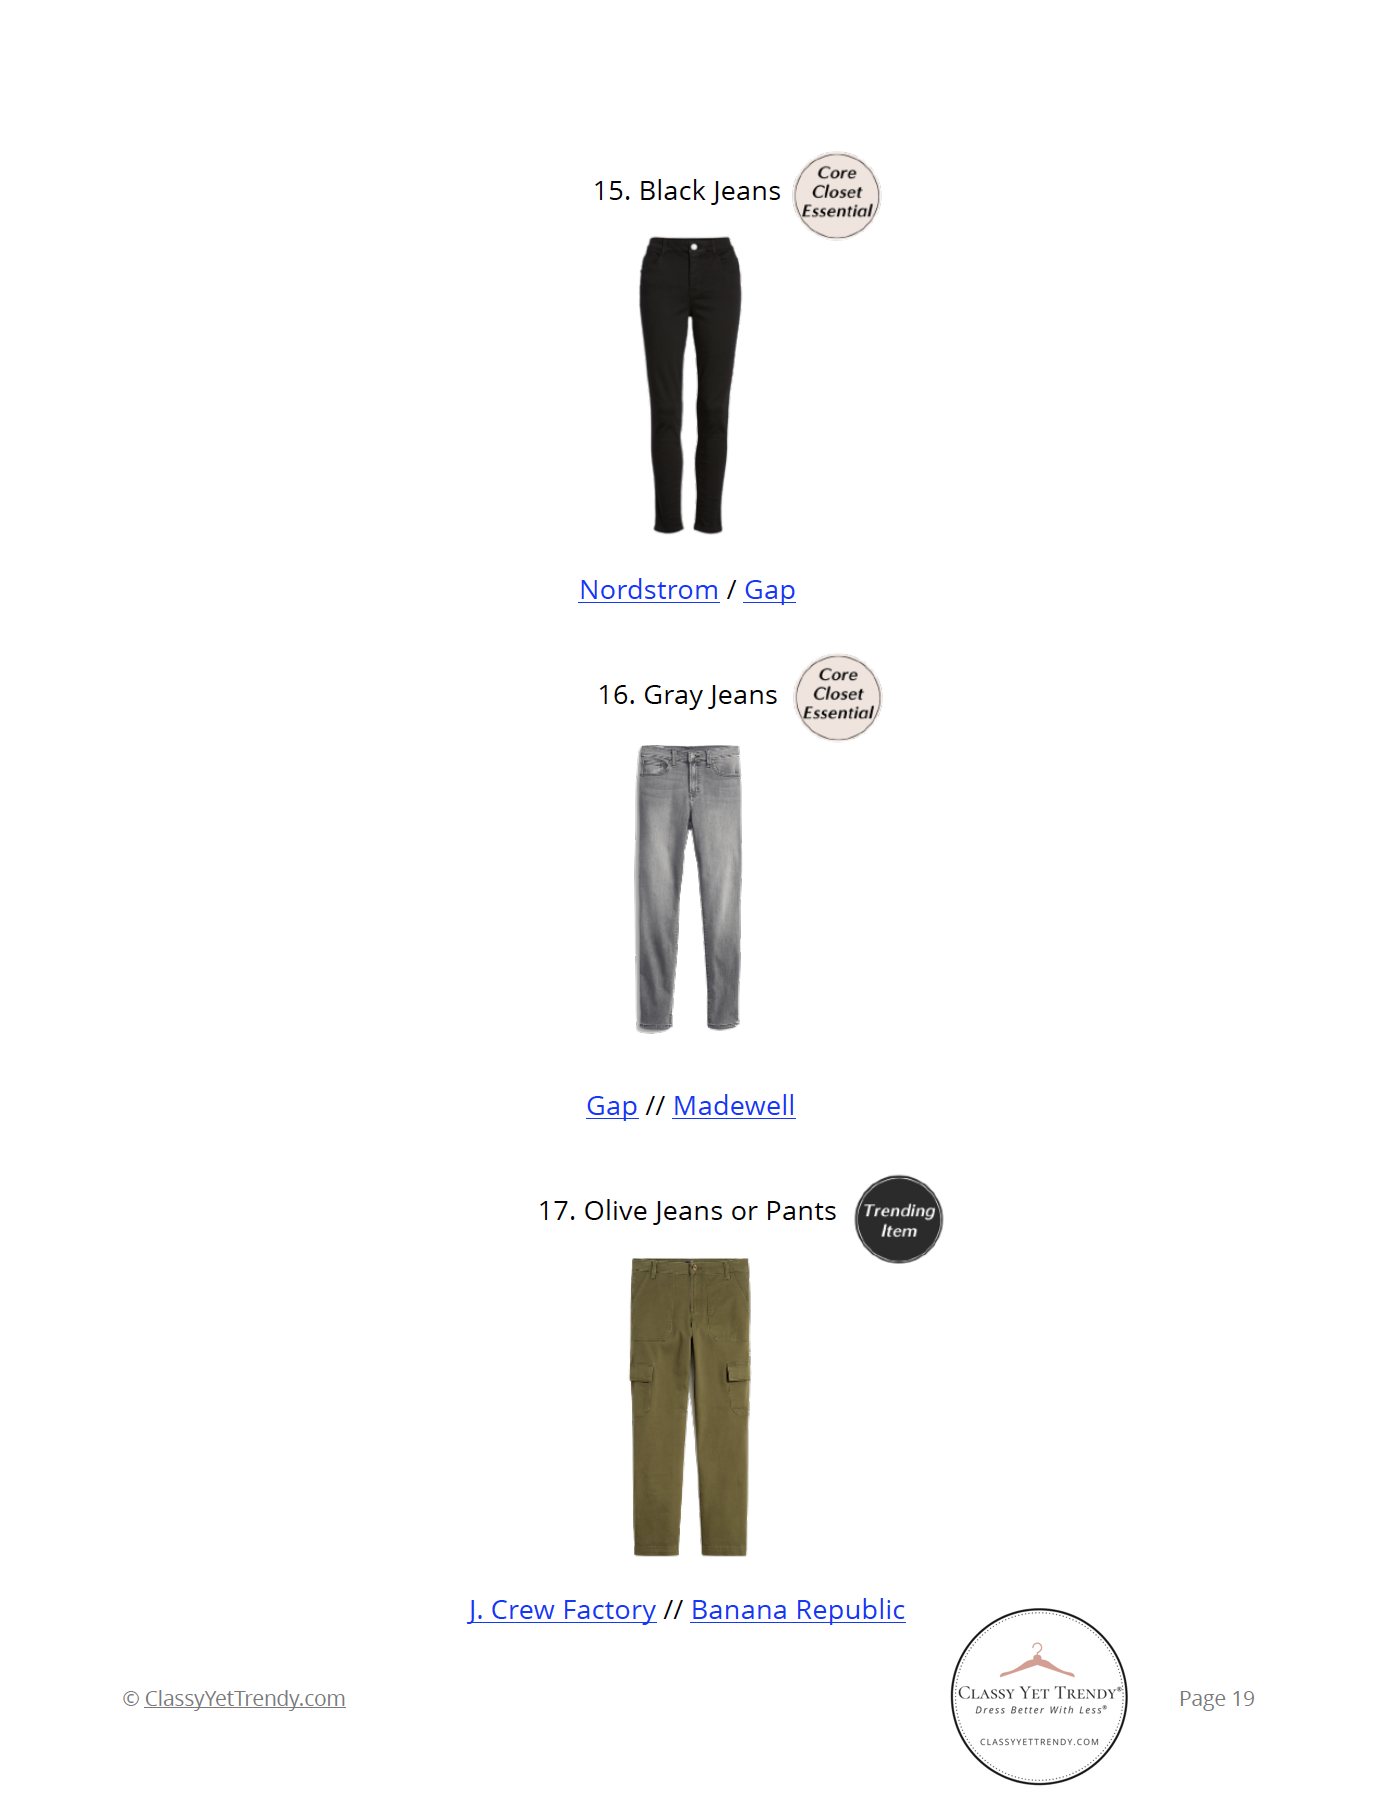 https://classyyettrendy.com/wp-content/uploads/2021/08/STAY-AT-HOME-MOM-CAPSULE-WARDROBE-FALL-2021-PG-19.png